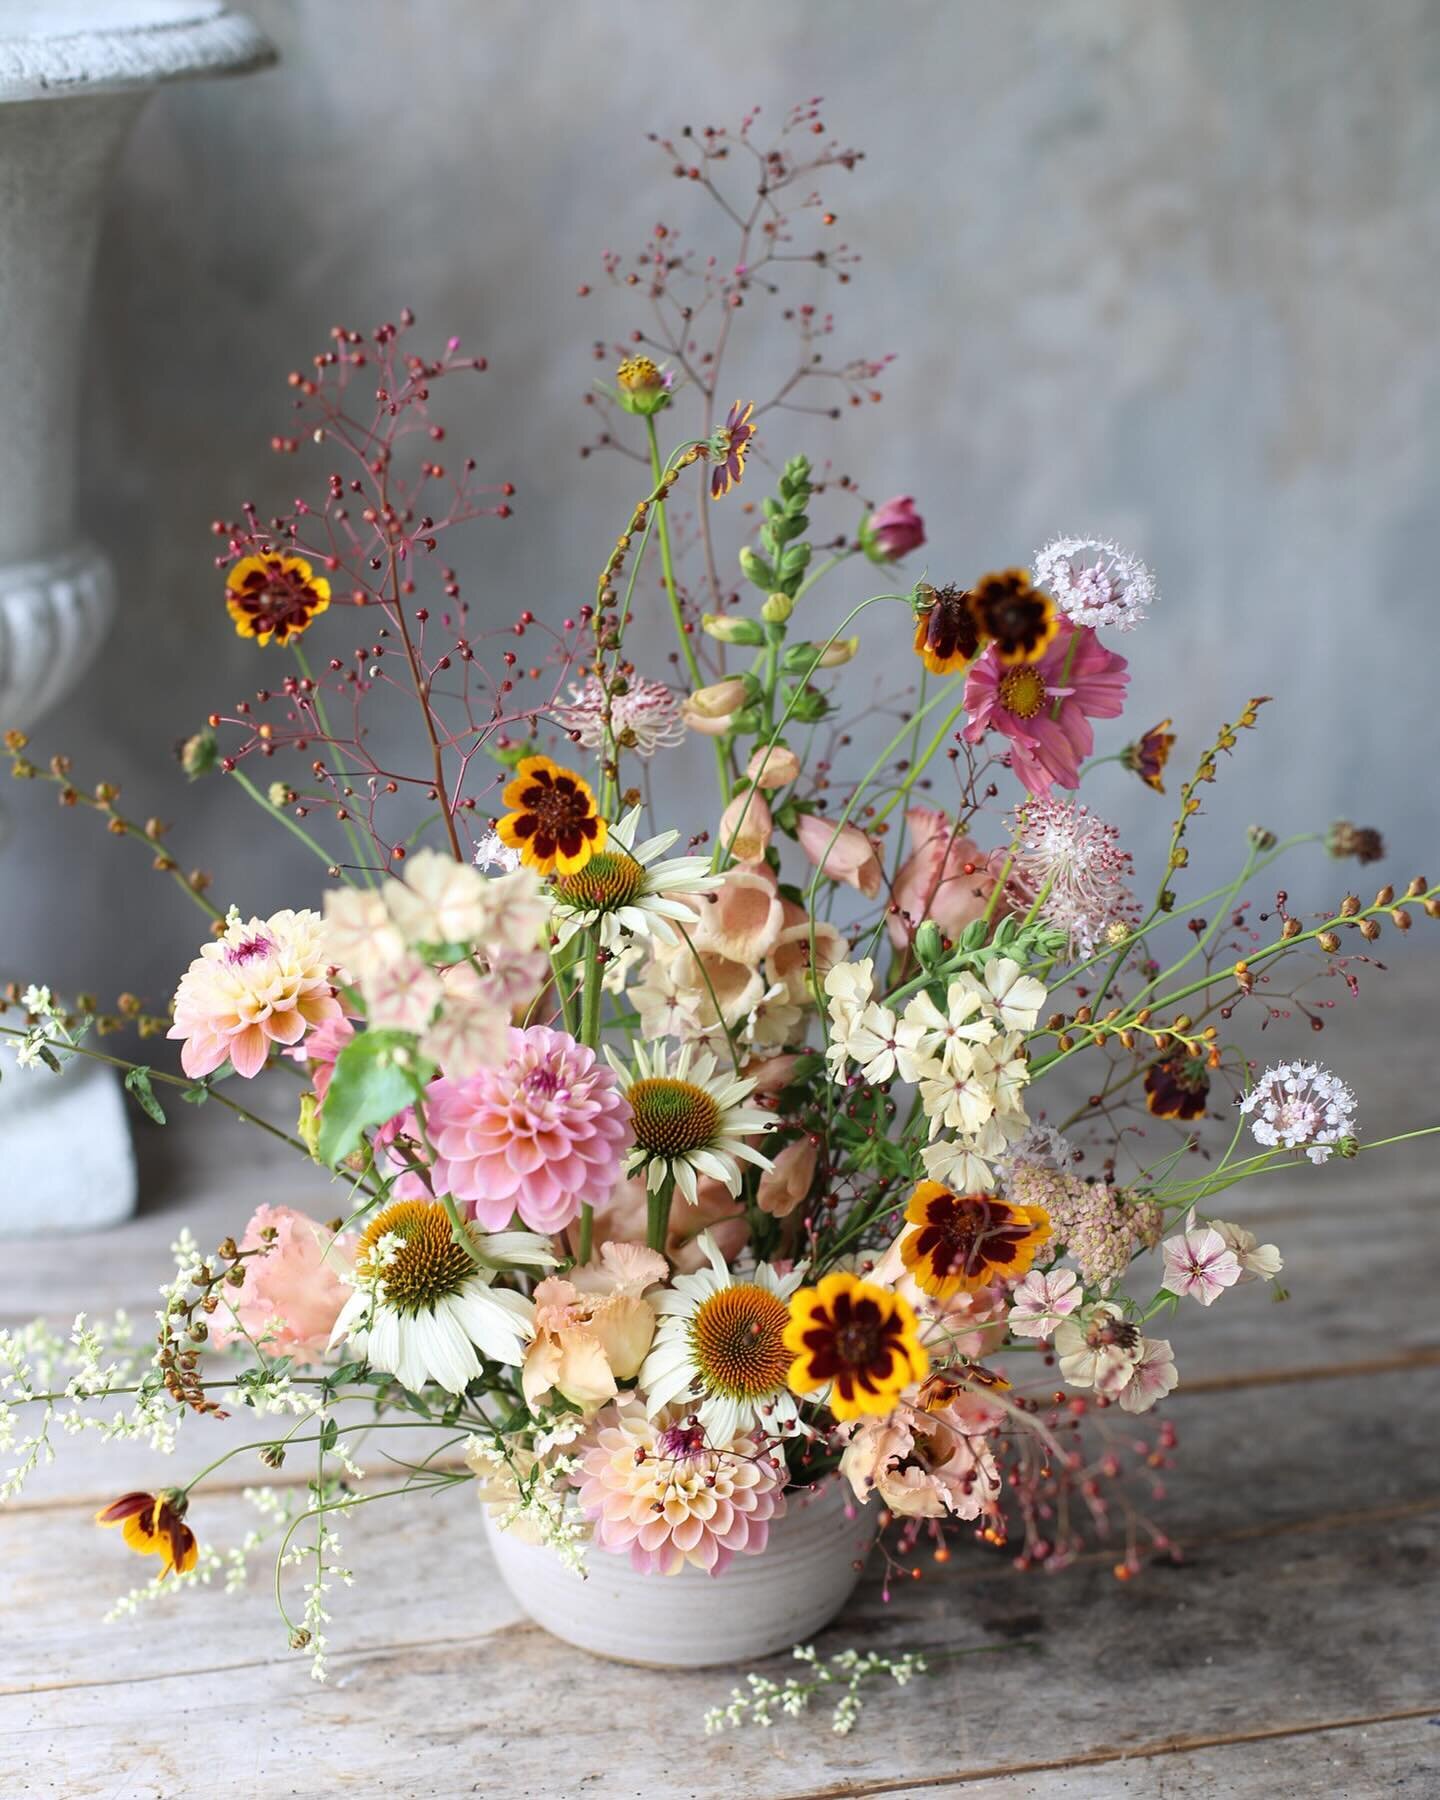 Yesterdays arrangement inspired by the late summer garden. I&rsquo;ve listed the ingredients below for anyone interested 🧡

Ingredients 
Dahlias - Wine Eyed Jill
Phlox - Creme Br&ucirc;l&eacute;e 
Blush Didiscus
Cosmidium Brunette 
Achellia
Lisianth